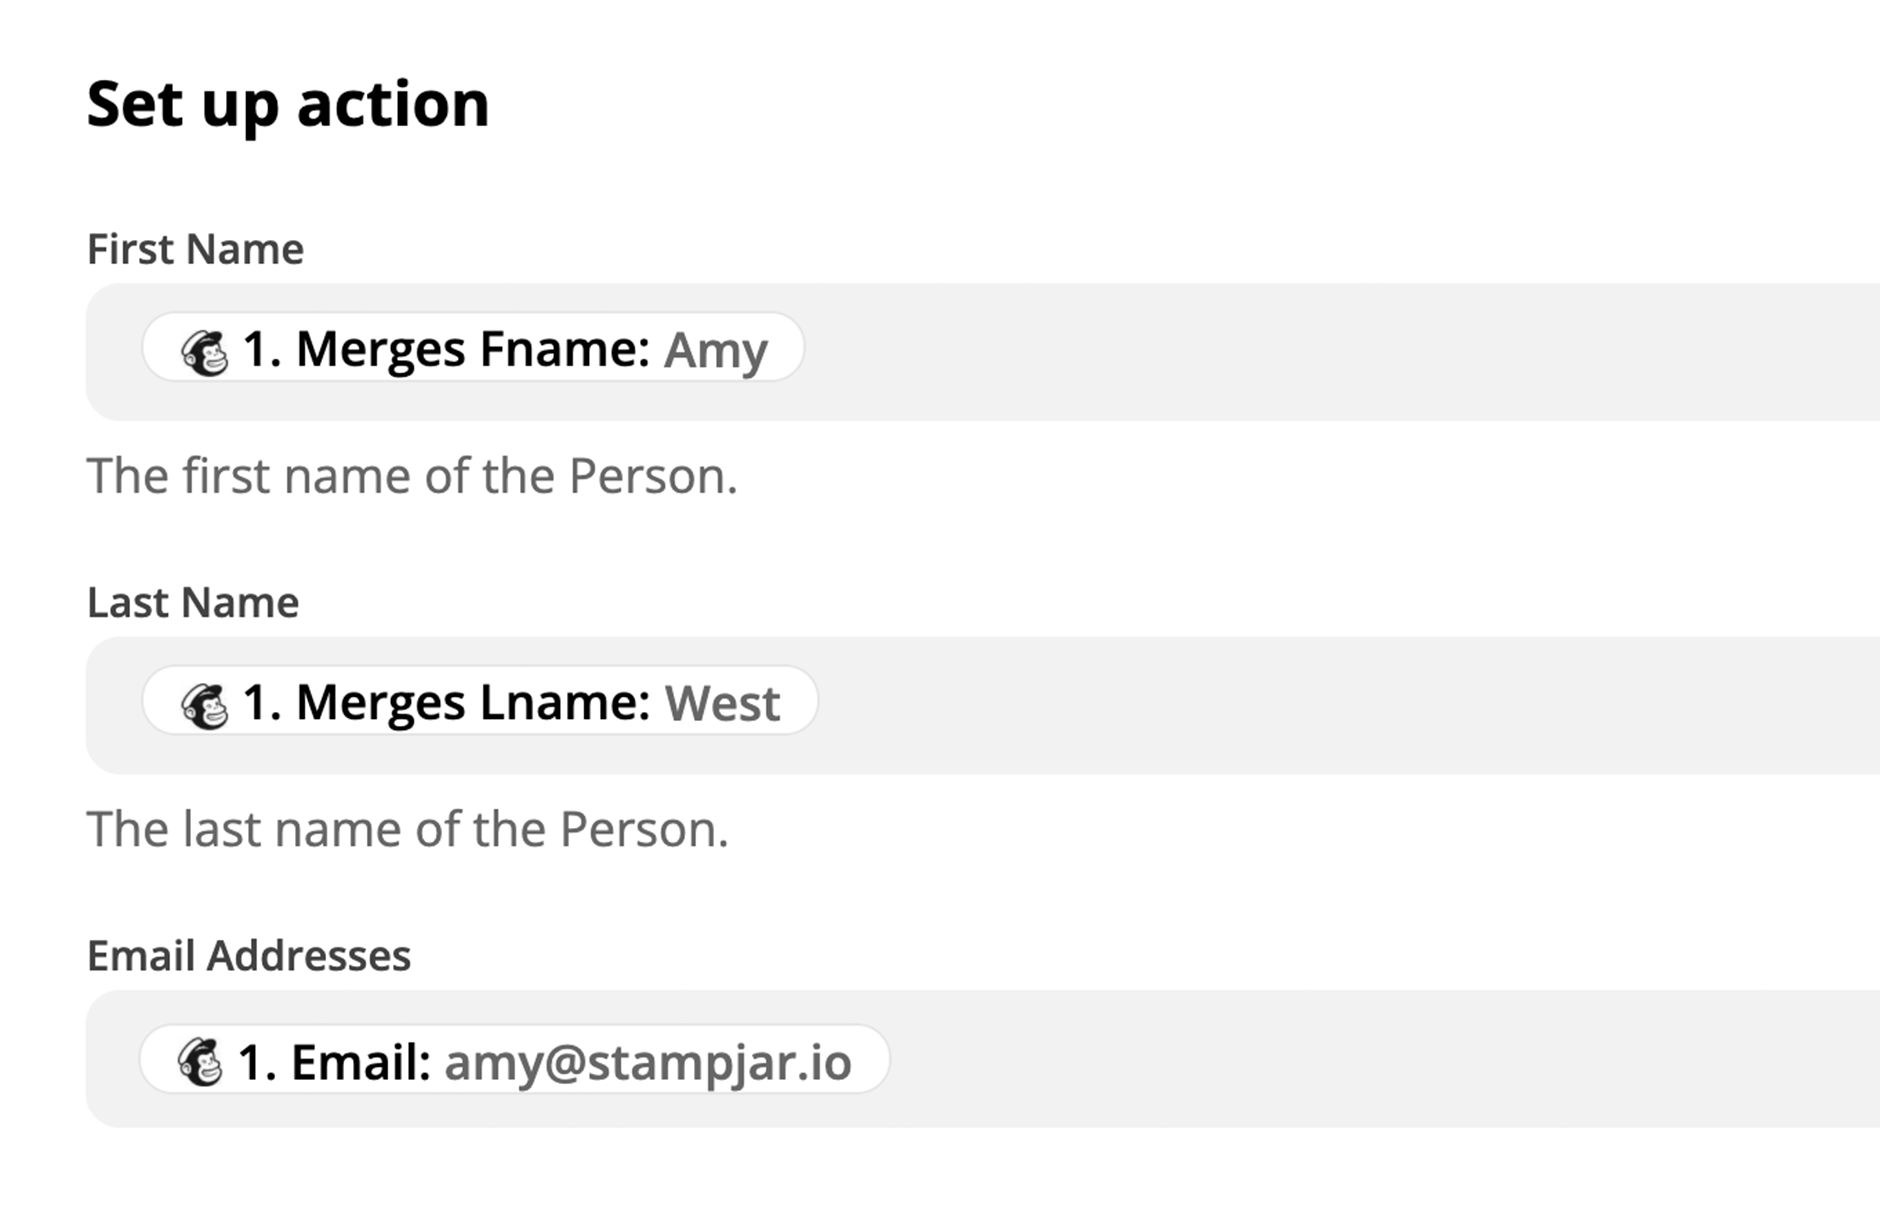 A Mailchimp trigger is being configured in Zapier, with name and email address values being pulled from step 1 of the Zap